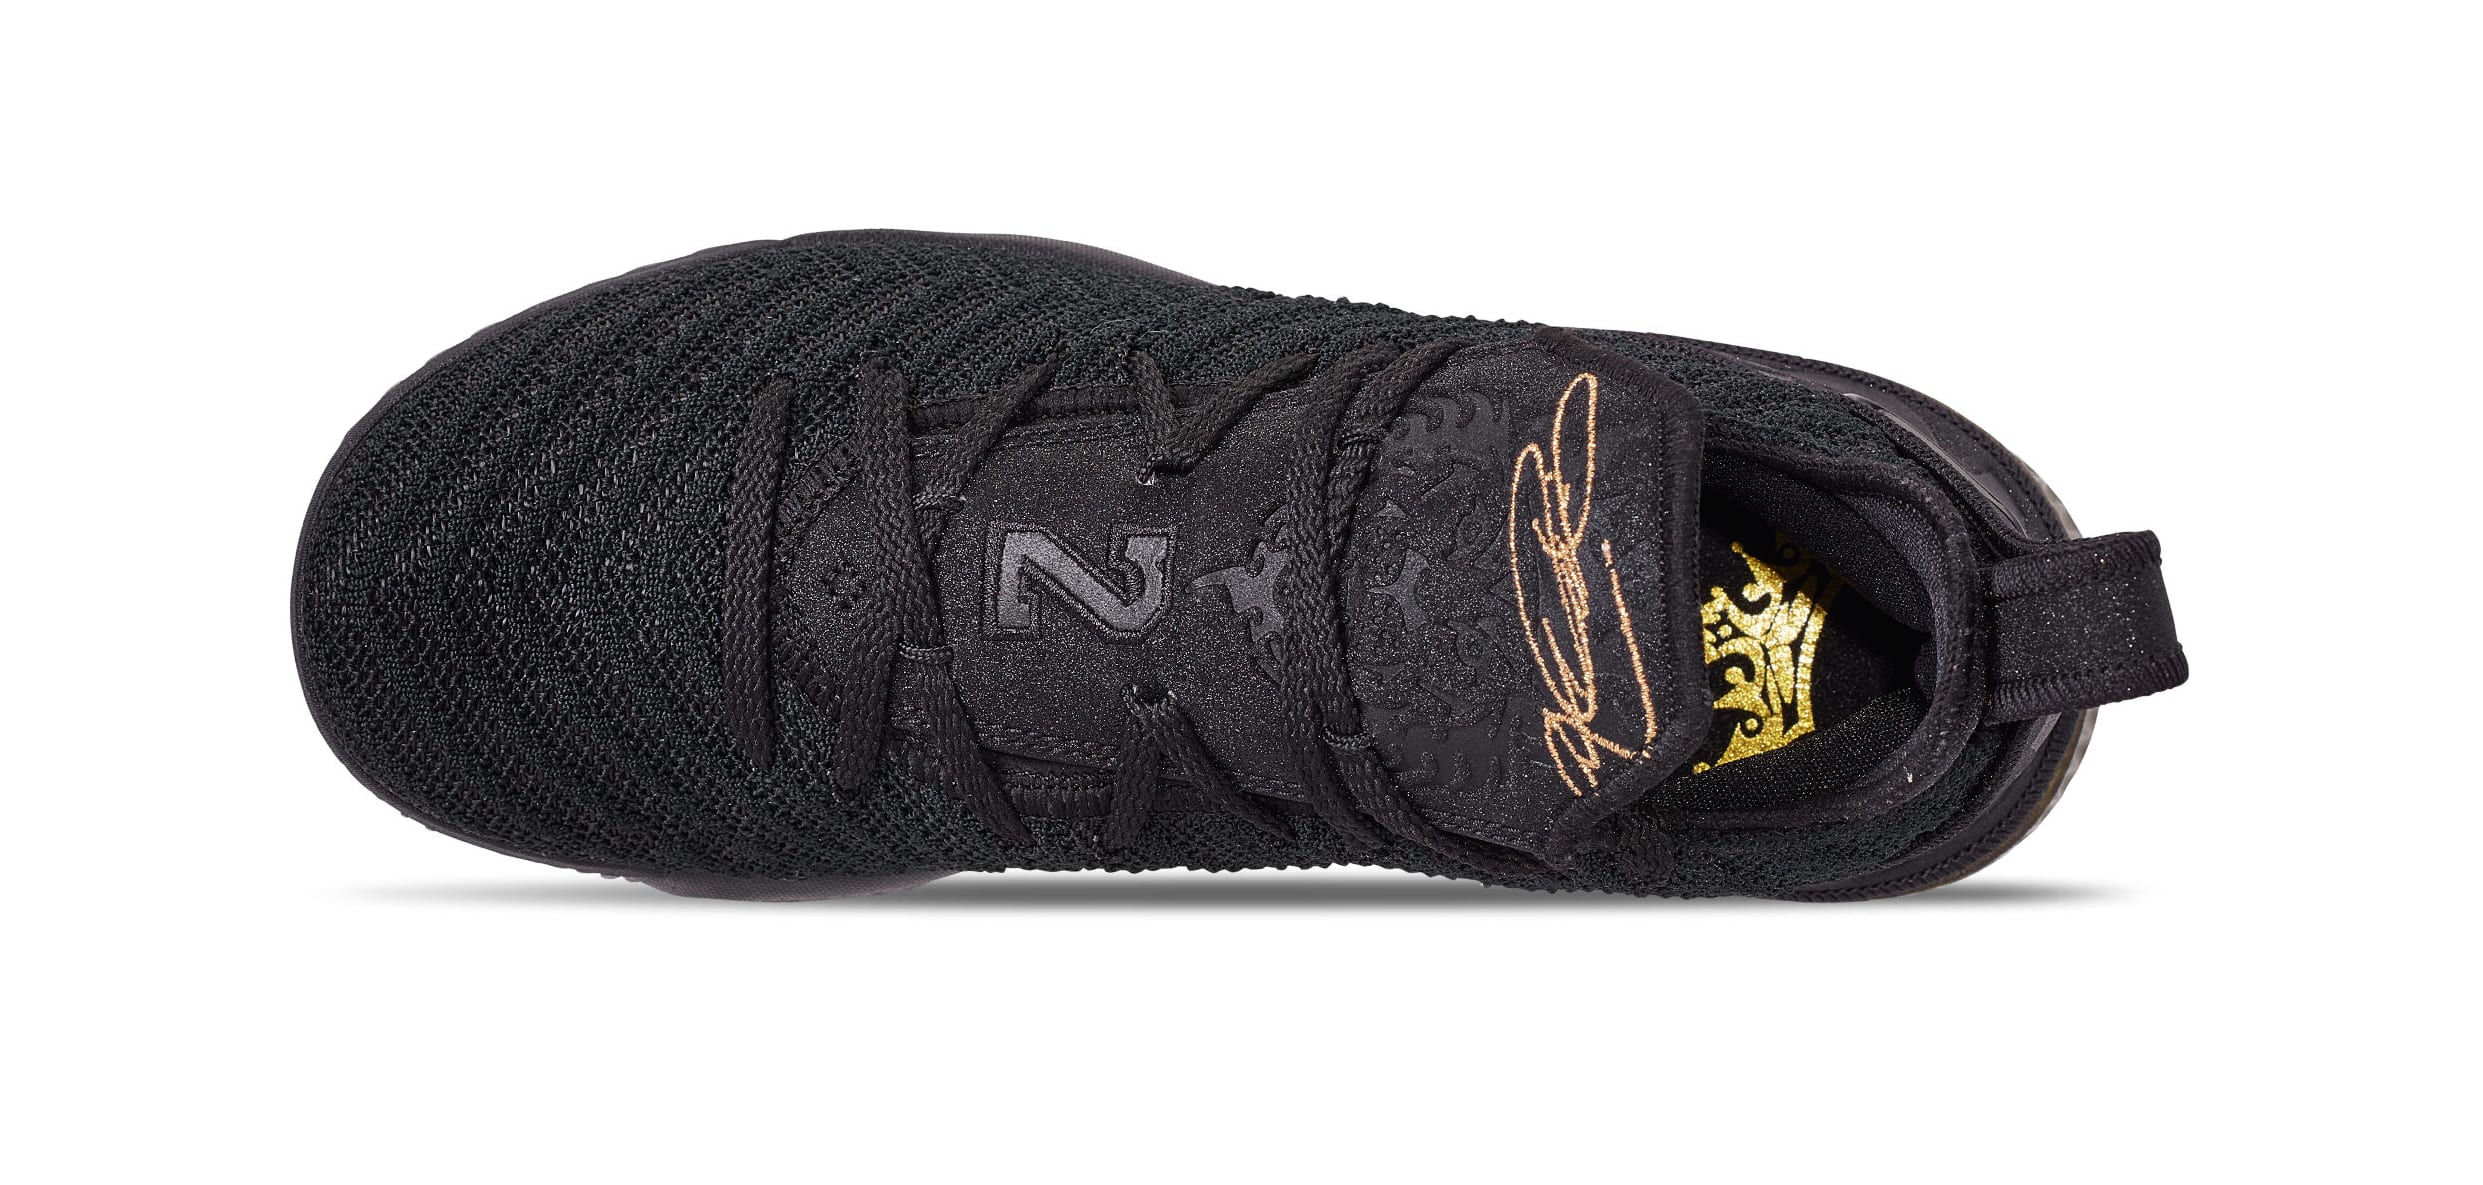 lebron black and gold 16